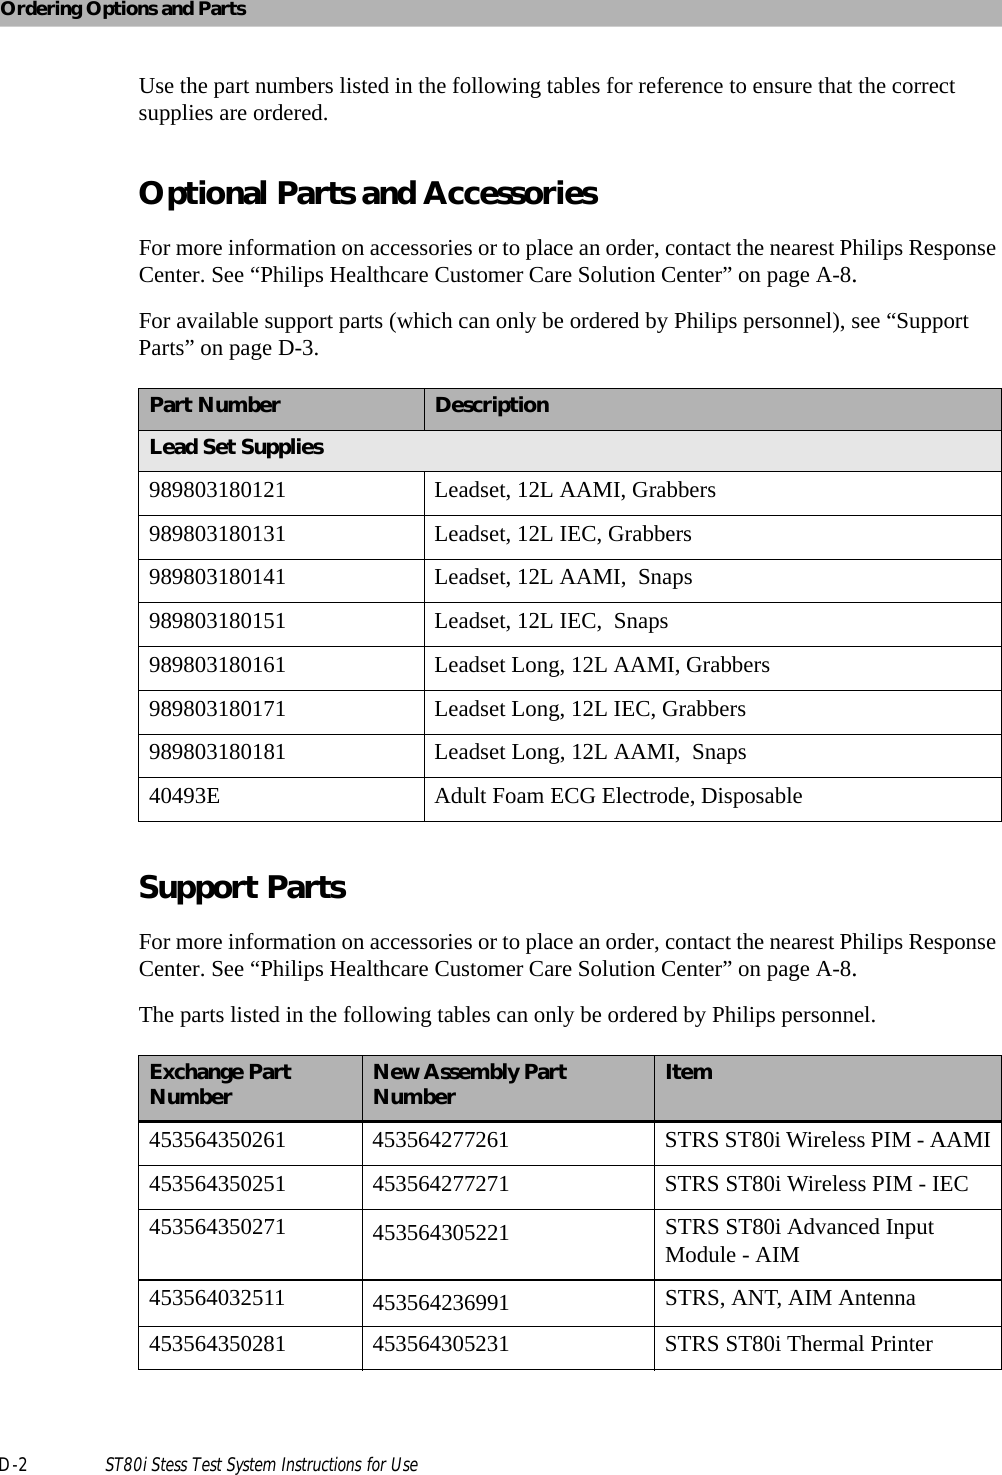 Ordering Options and PartsD-2 ST80i Stess Test System Instructions for UseUse the part numbers listed in the following tables for reference to ensure that the correct supplies are ordered.Optional Parts and AccessoriesFor more information on accessories or to place an order, contact the nearest Philips Response Center. See “Philips Healthcare Customer Care Solution Center” on page A-8. For available support parts (which can only be ordered by Philips personnel), see “Support Parts” on page D-3. Support PartsFor more information on accessories or to place an order, contact the nearest Philips Response Center. See “Philips Healthcare Customer Care Solution Center” on page A-8. The parts listed in the following tables can only be ordered by Philips personnel.Part Number DescriptionLead Set Supplies989803180121 Leadset, 12L AAMI, Grabbers989803180131 Leadset, 12L IEC, Grabbers989803180141 Leadset, 12L AAMI,  Snaps989803180151 Leadset, 12L IEC,  Snaps989803180161 Leadset Long, 12L AAMI, Grabbers989803180171 Leadset Long, 12L IEC, Grabbers989803180181 Leadset Long, 12L AAMI,  Snaps40493E Adult Foam ECG Electrode, DisposableExchange Part Number New Assembly Part Number Item453564350261 453564277261 STRS ST80i Wireless PIM - AAMI453564350251 453564277271 STRS ST80i Wireless PIM - IEC453564350271 453564305221 STRS ST80i Advanced Input Module - AIM453564032511 453564236991 STRS, ANT, AIM Antenna453564350281 453564305231 STRS ST80i Thermal Printer